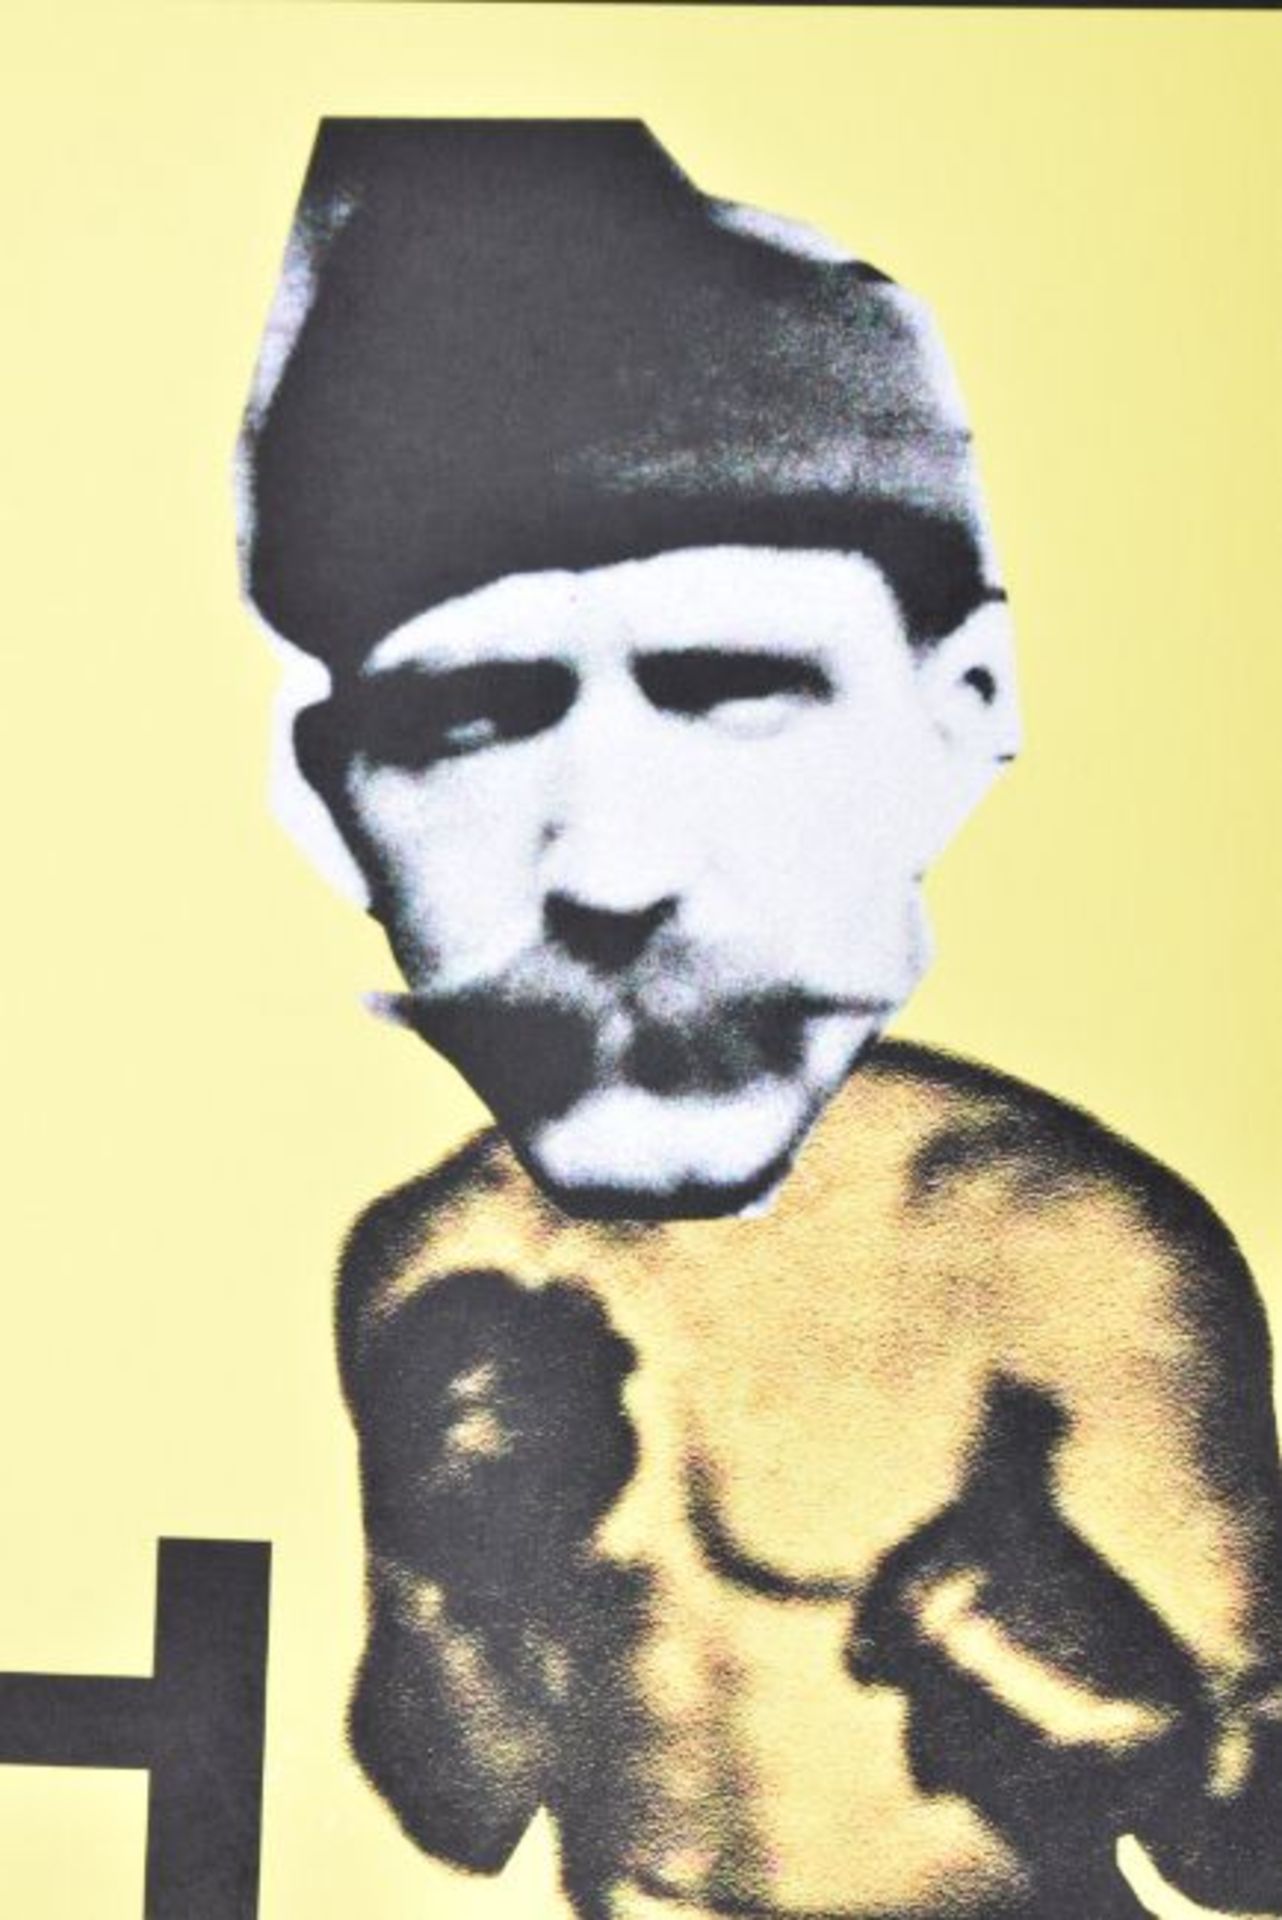 2006 Artists Face-off ‘Naughty’ Cauty VS ‘Wild’ Billy Childish 'Fight Ticket' by L 13 Gallery Fly... - Image 2 of 6